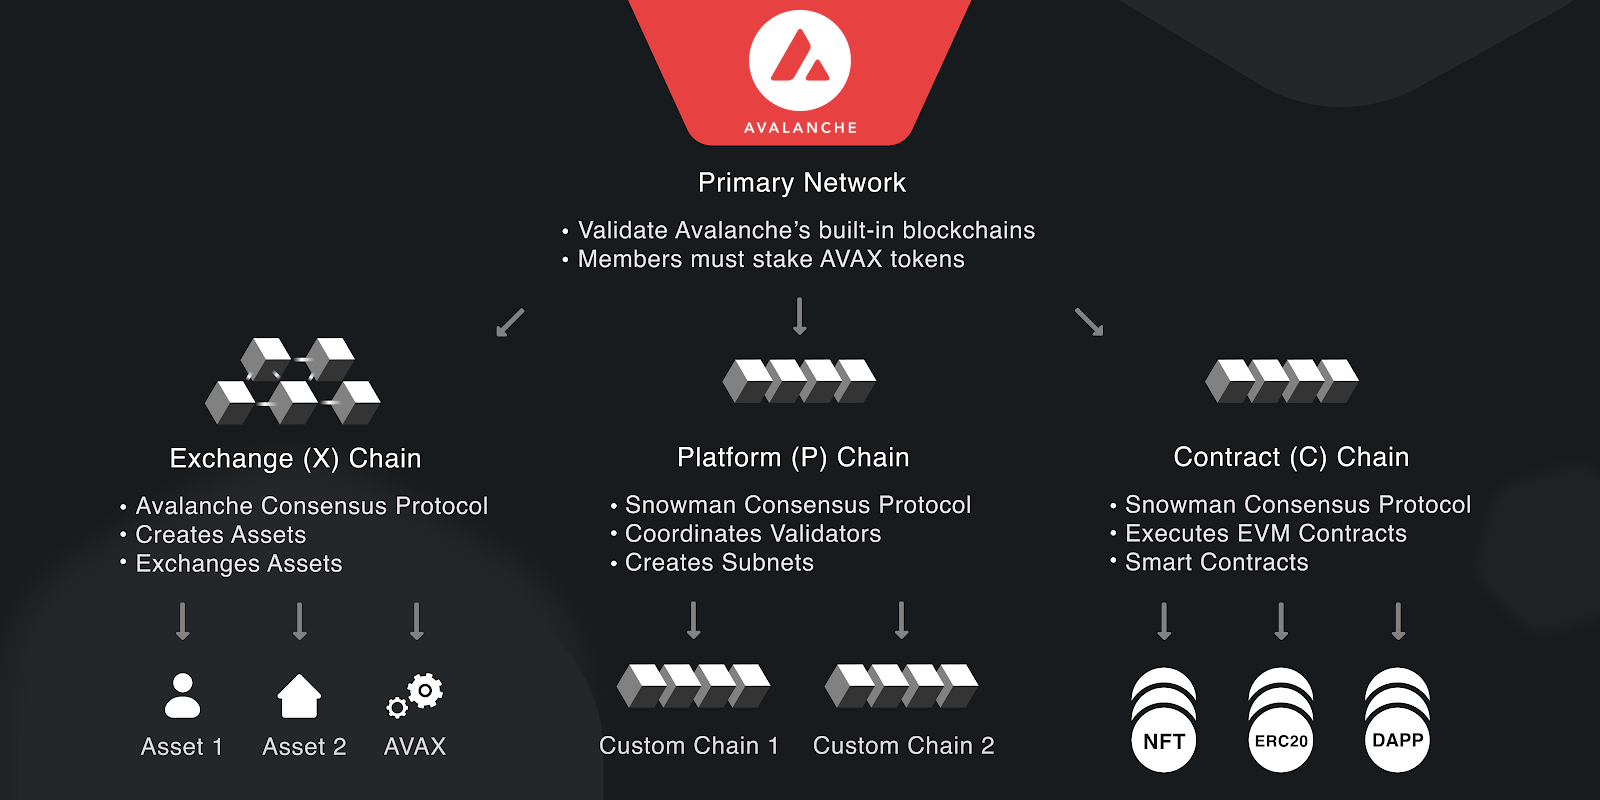 Network topology diagram for dApps on Avalanche